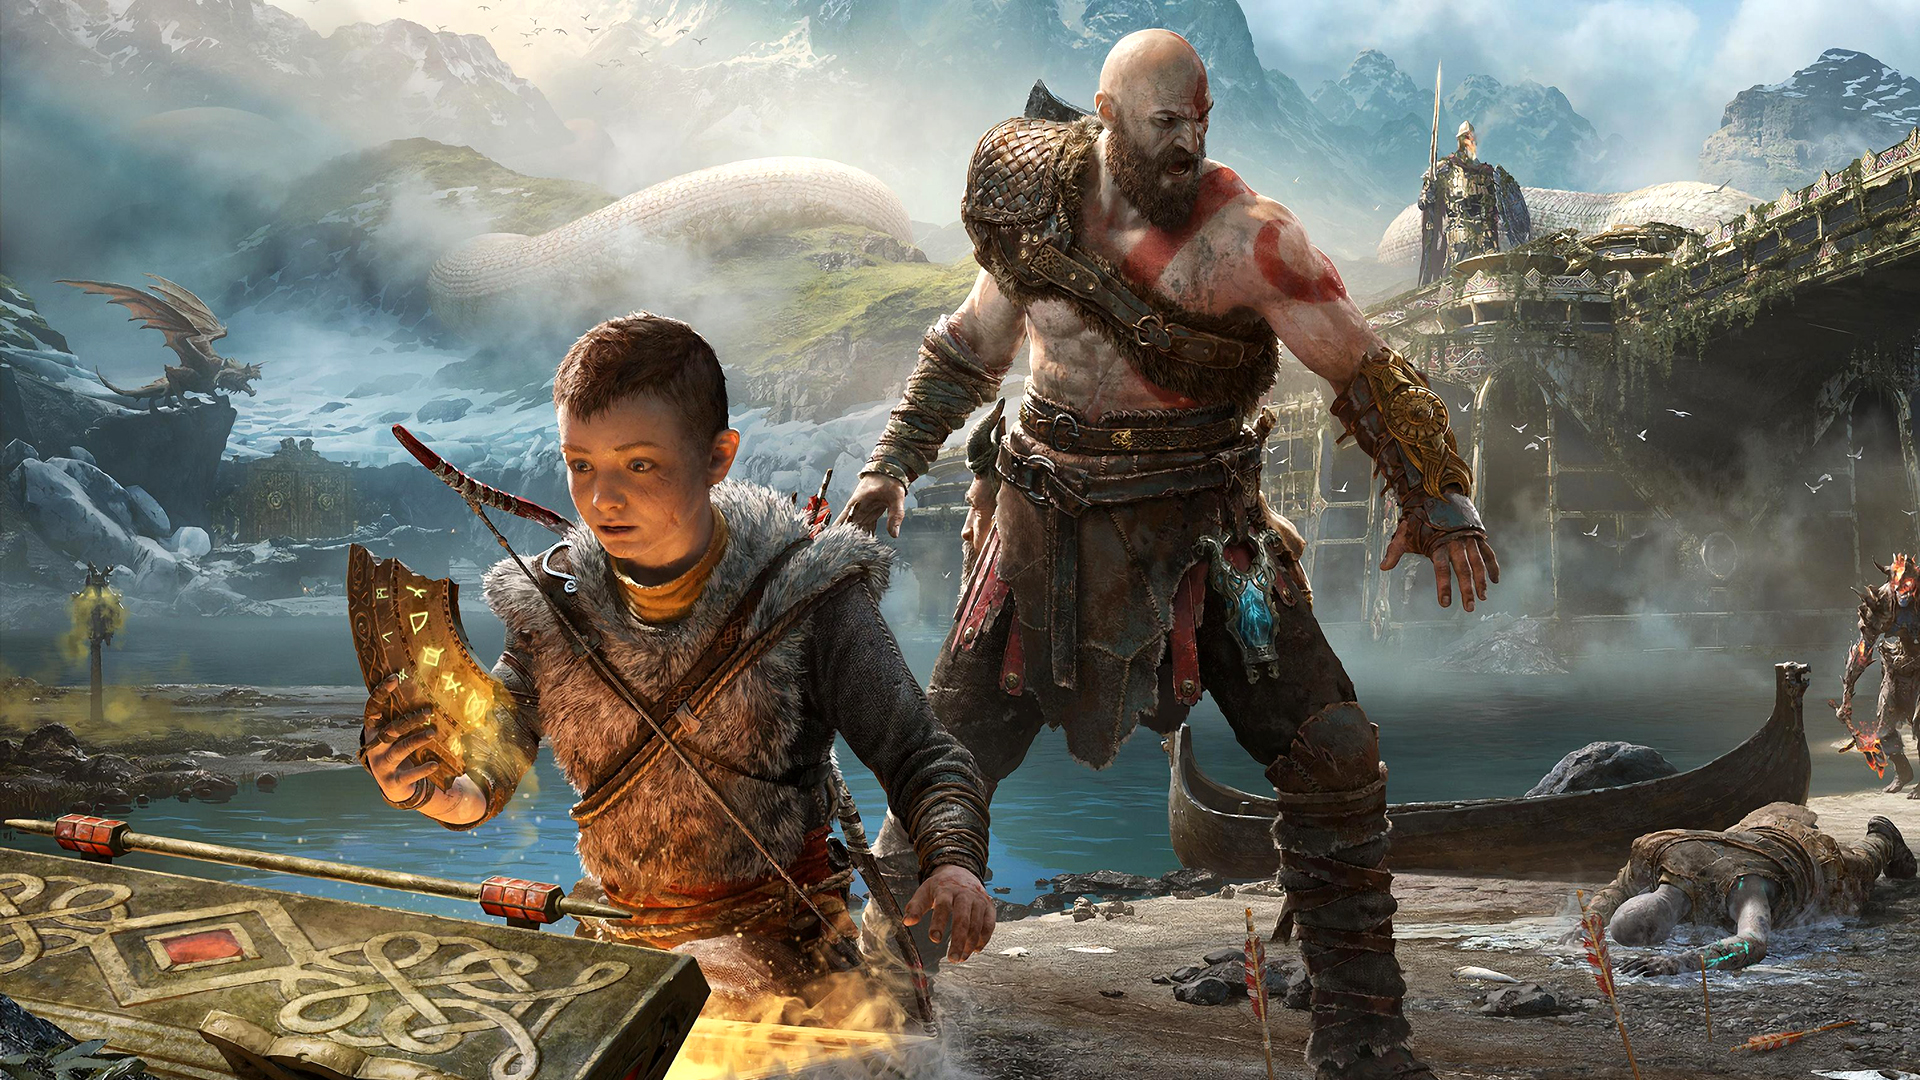 God of War is the top-rated and most-played Sony game on Steam